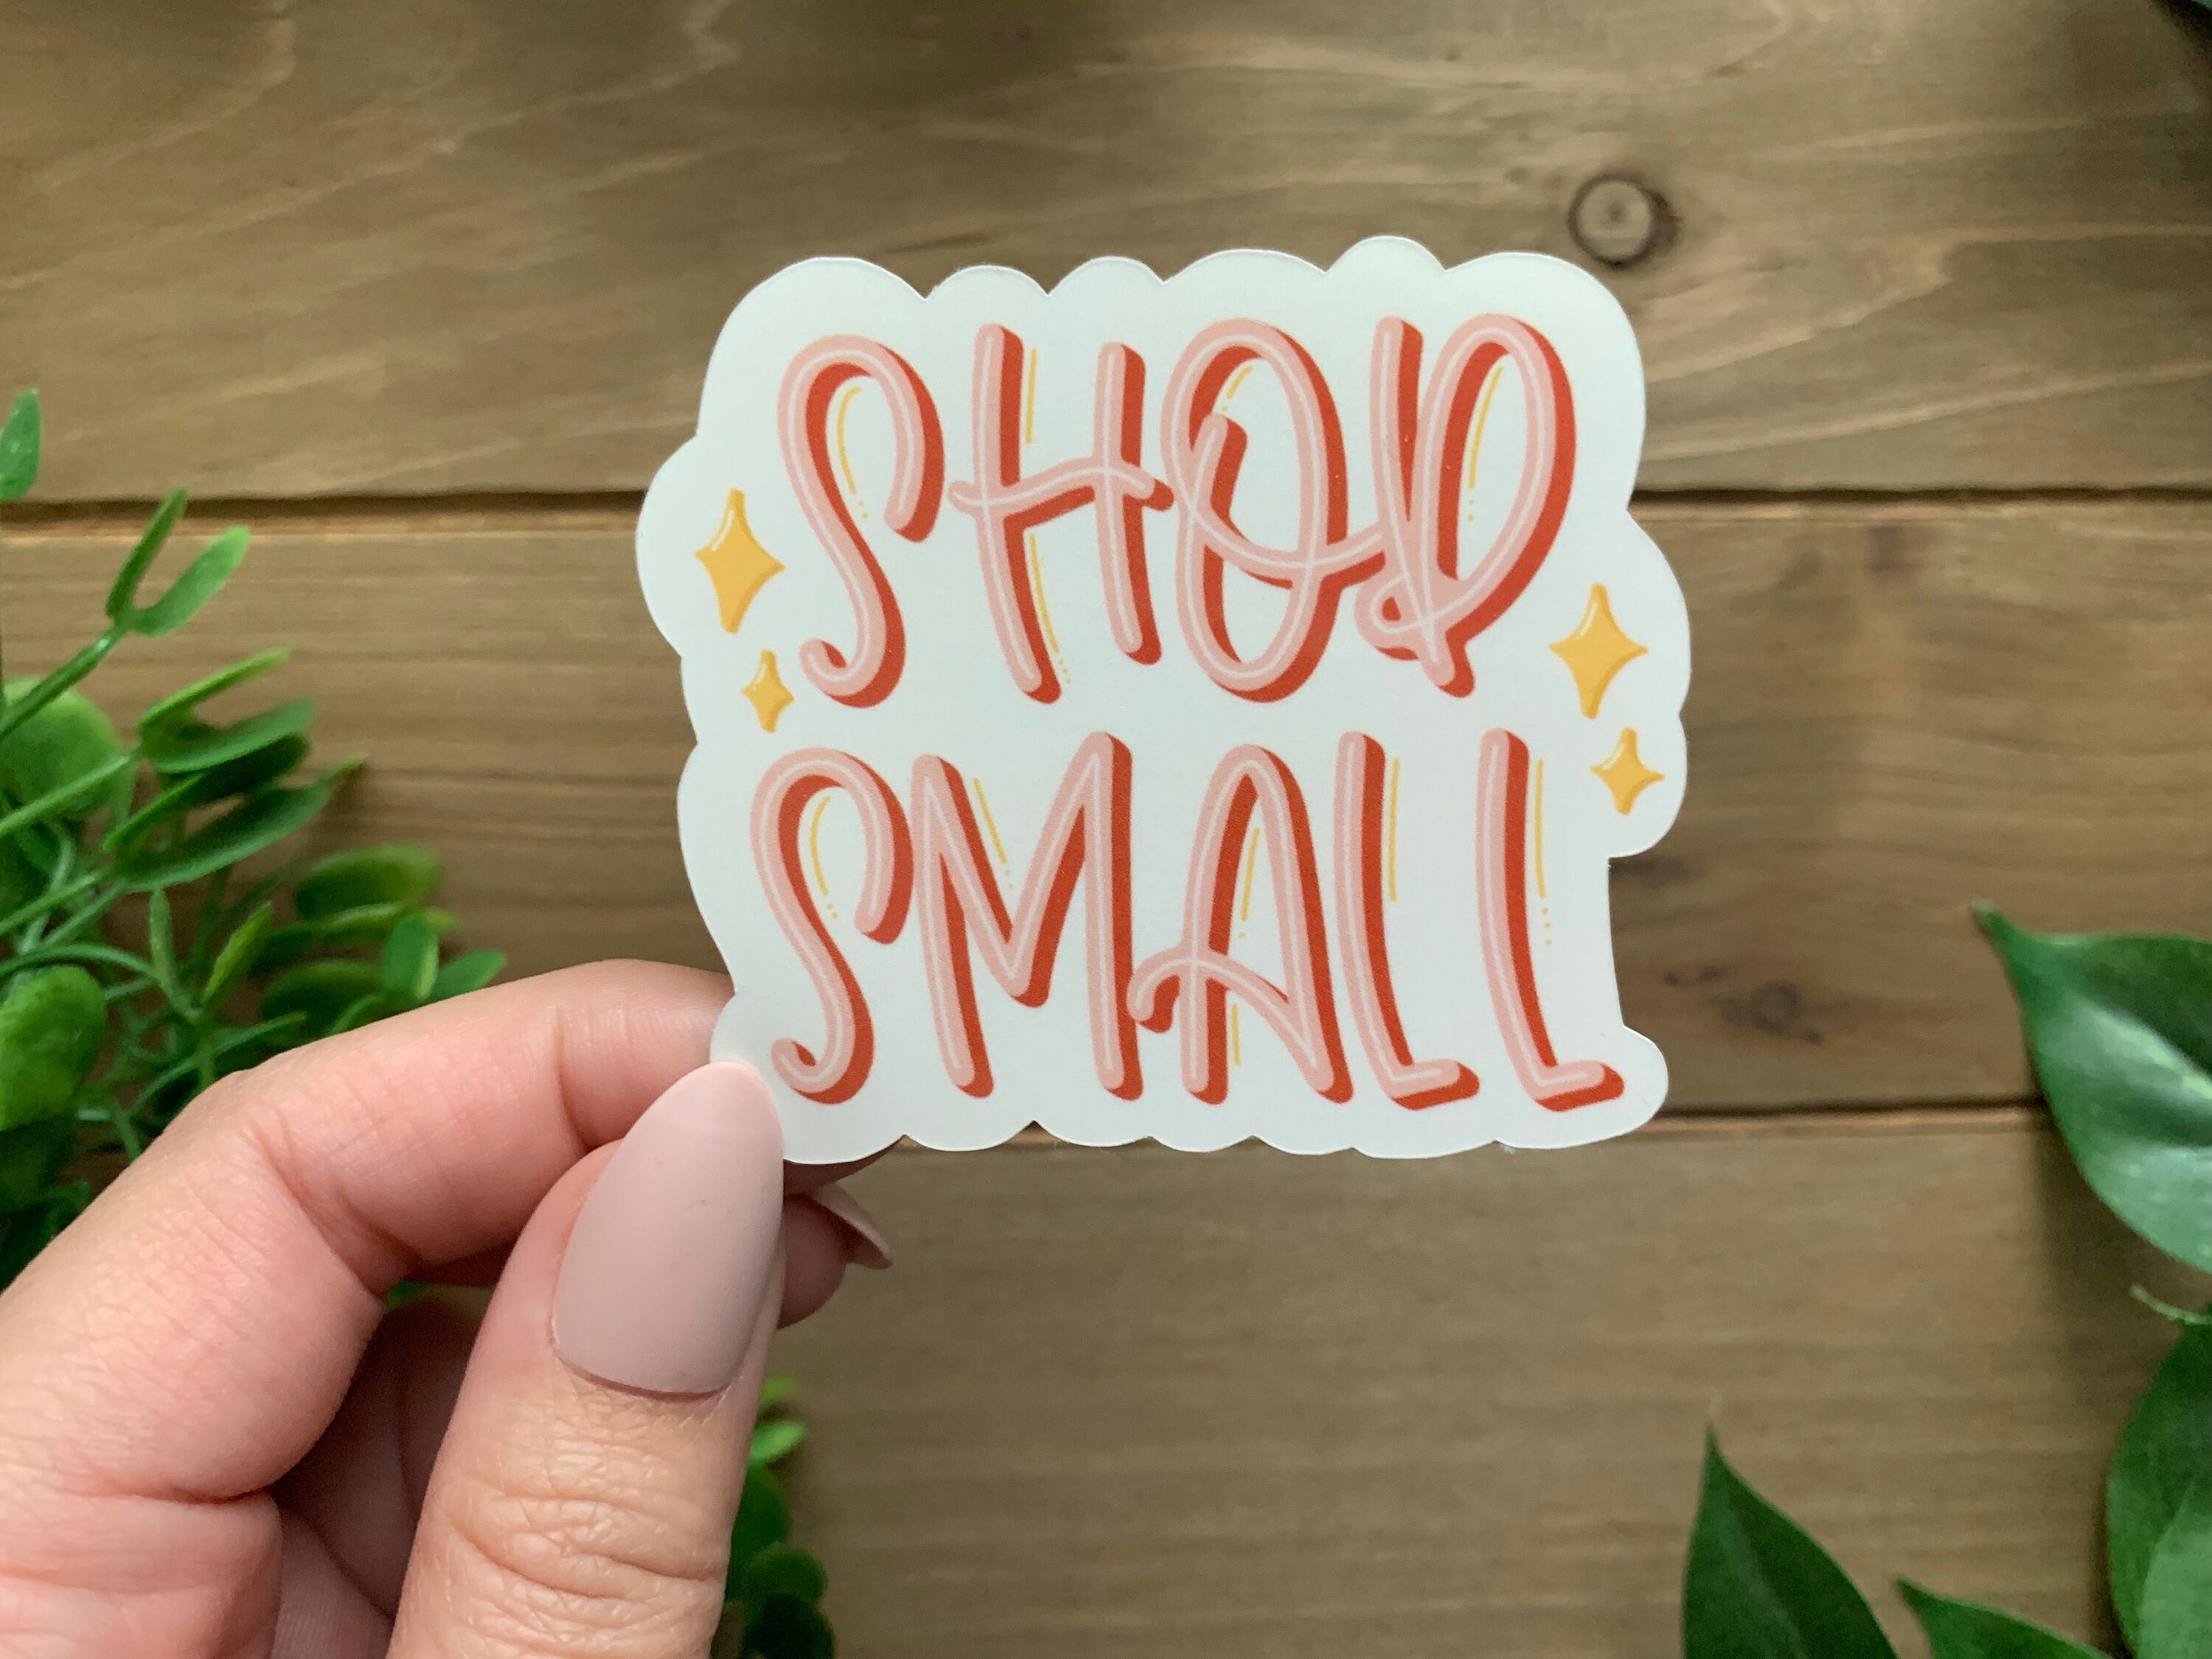 SMALL BUSINESS OWNER Sticker Water Bottle Decals Water Resistant Vinyl Laptop Stickers Small Biz Owner Stickers Boho Aesthetic